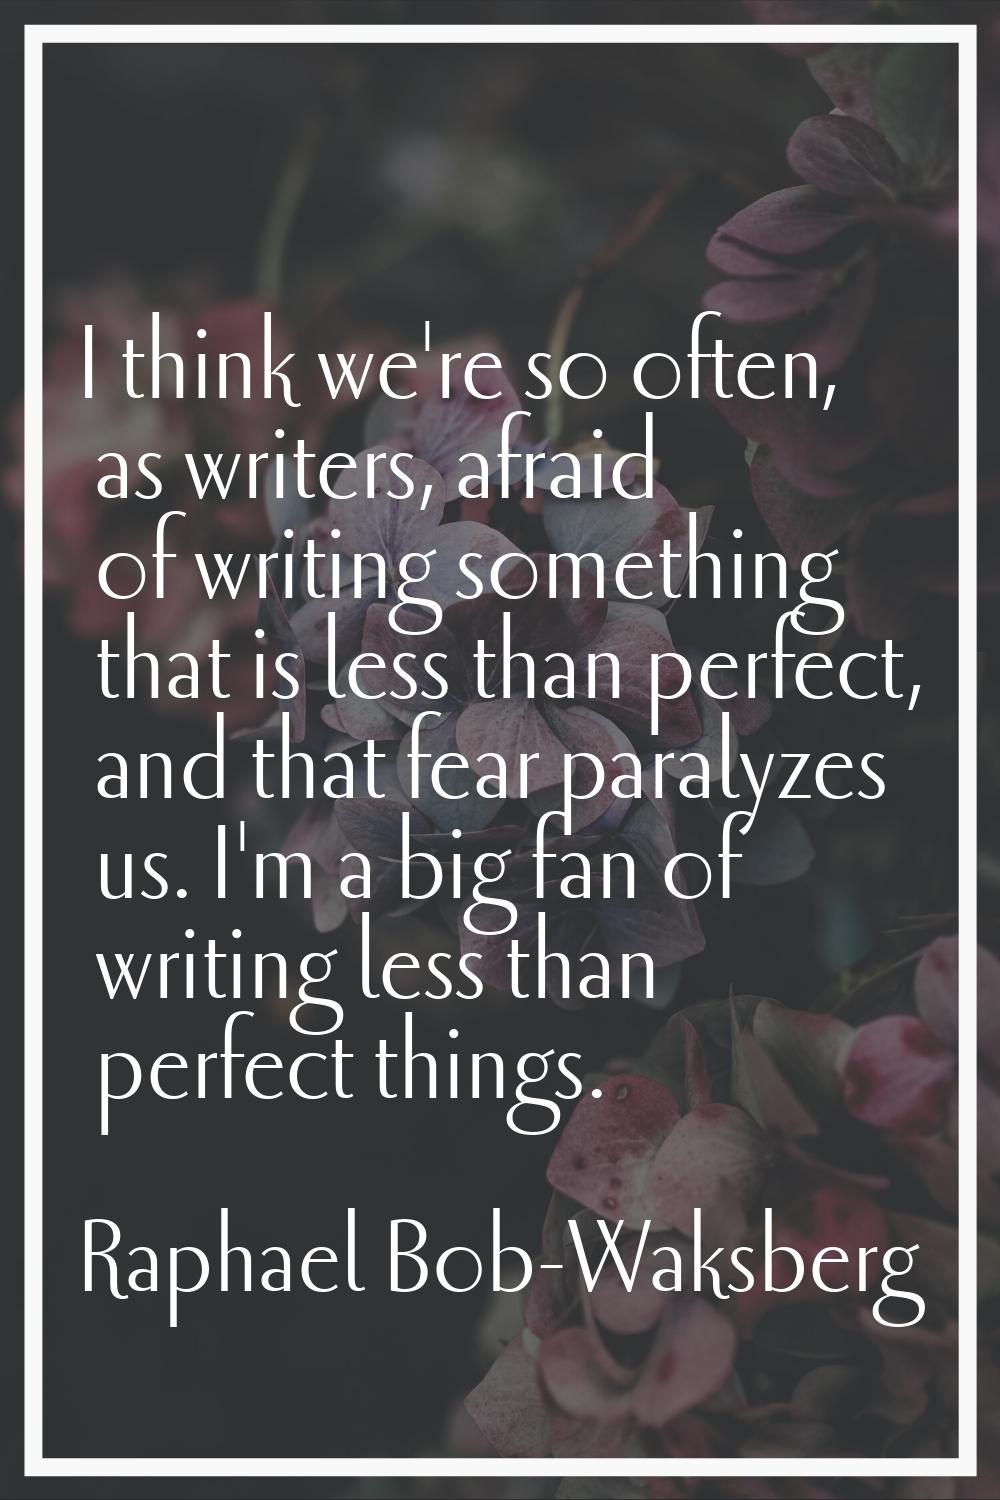 I think we're so often, as writers, afraid of writing something that is less than perfect, and that